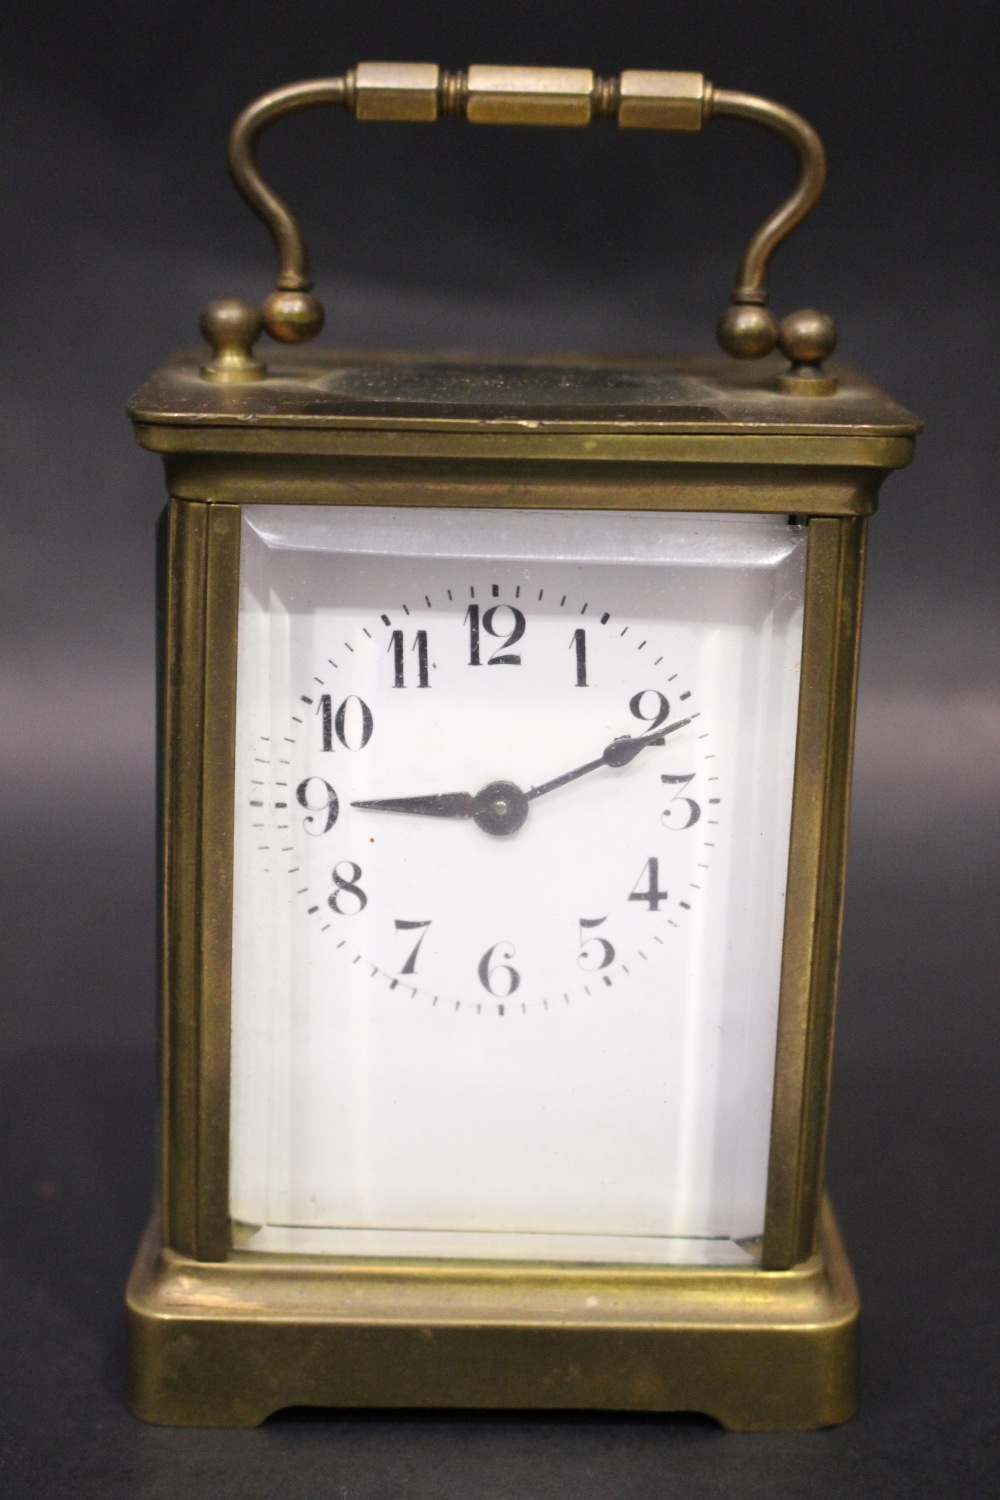 A FRENCH CASH CARRIAGE CLOCK, brass frame, bevelled glass on all sides, 5" x 4" x 3.5" approx case - Image 4 of 7